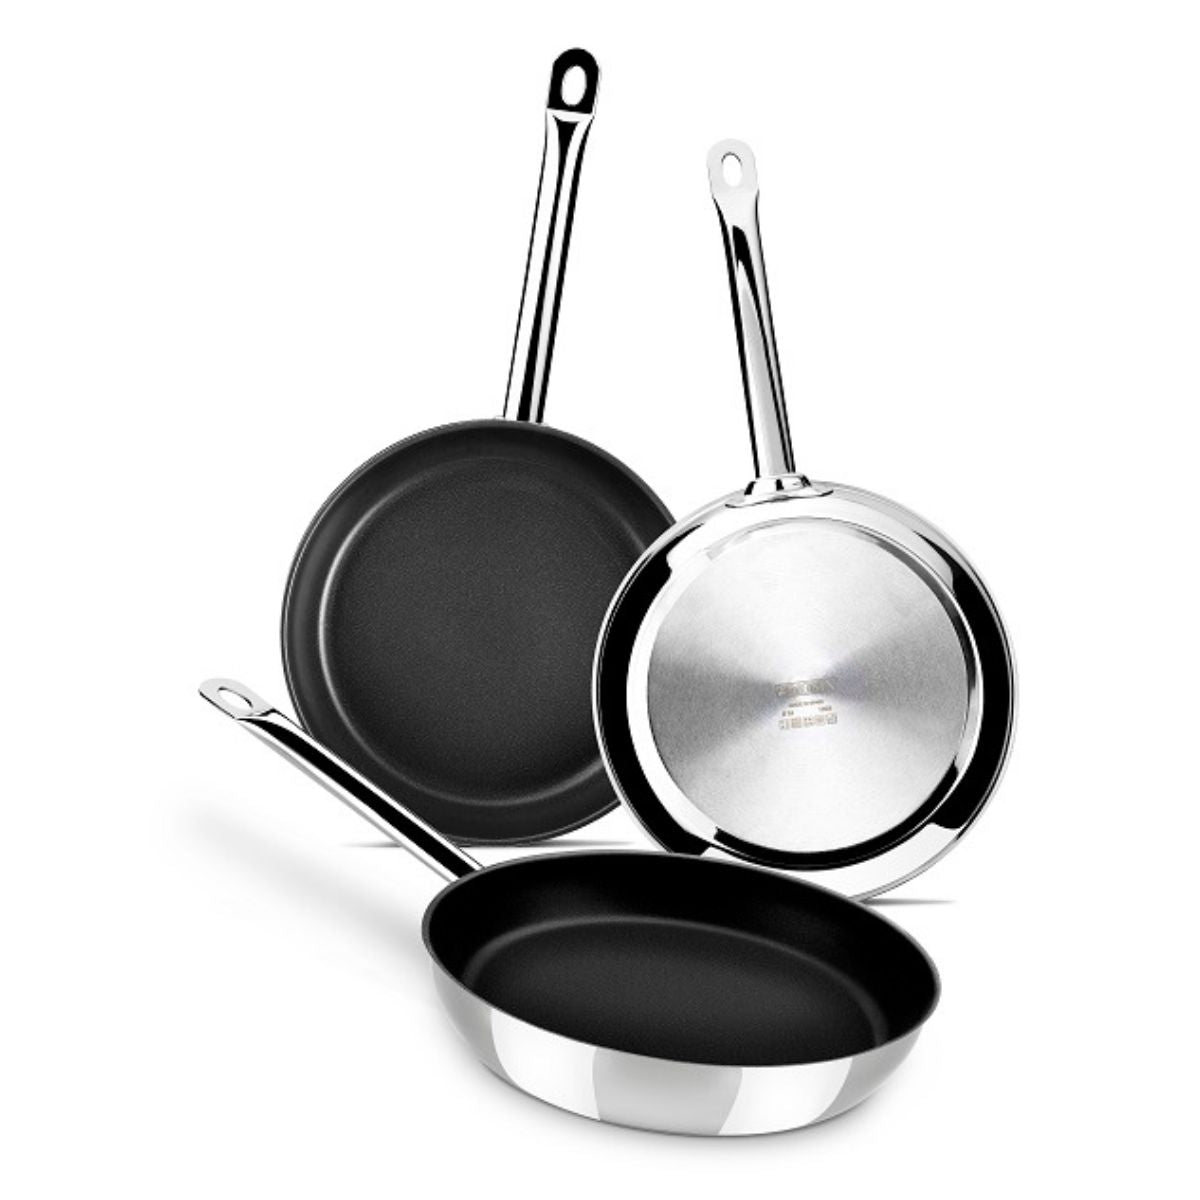 Chef Non-Stick Frying Pan